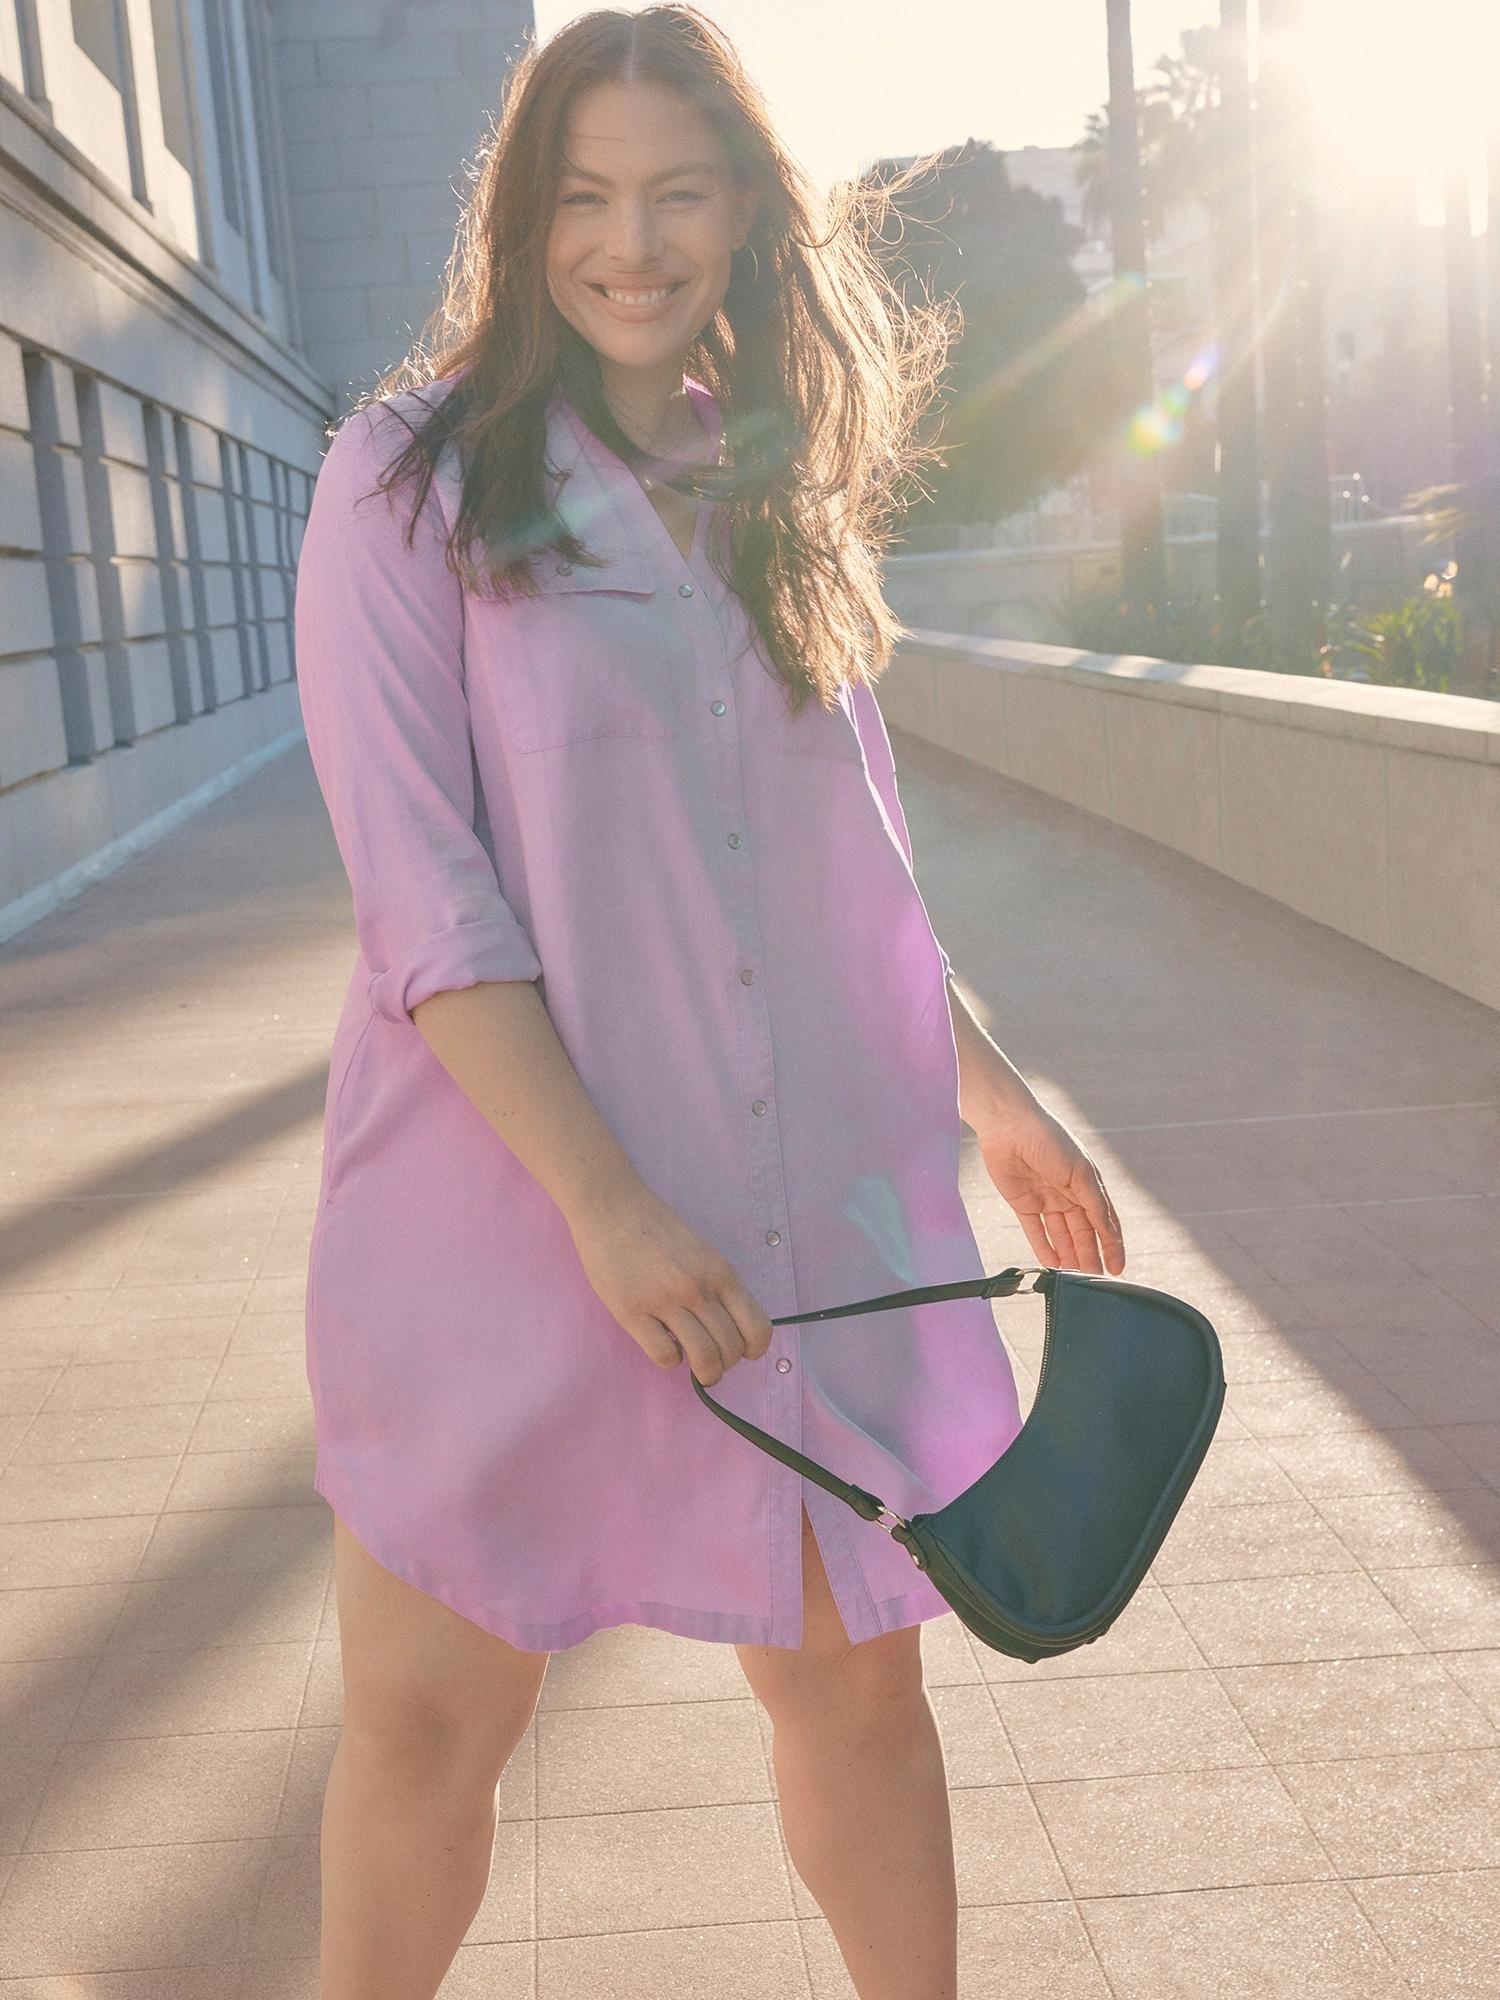 person in a buttoned shirt dress smiling with a sling bag, standing outdoors